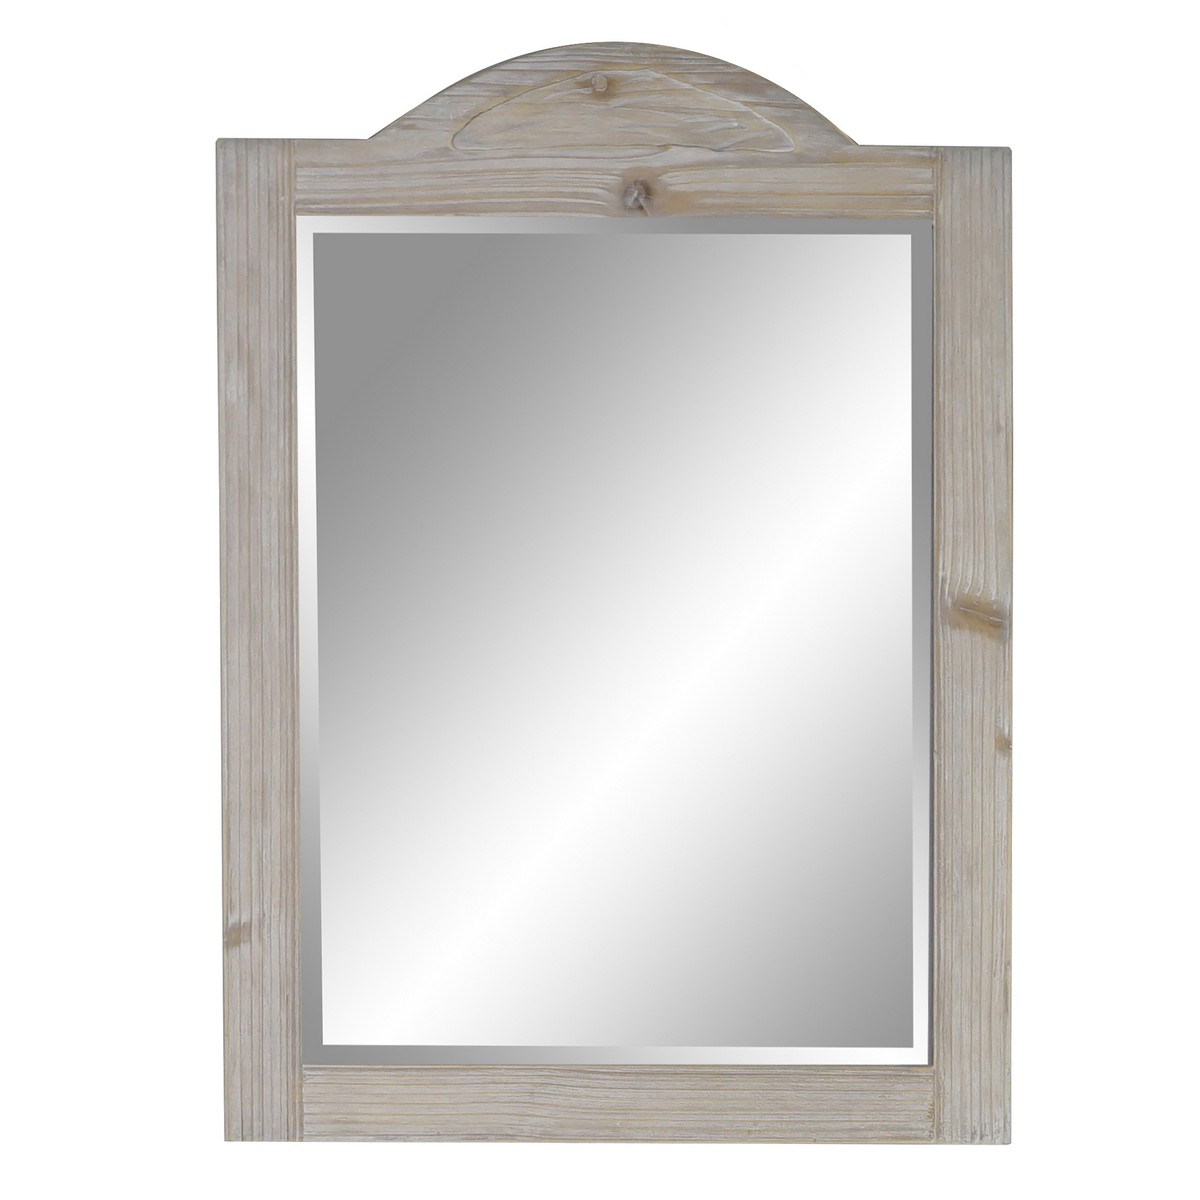 INFURNITURE WK1388M 26 x 36 INCH SOLID RECYCLED FIR MIRROR